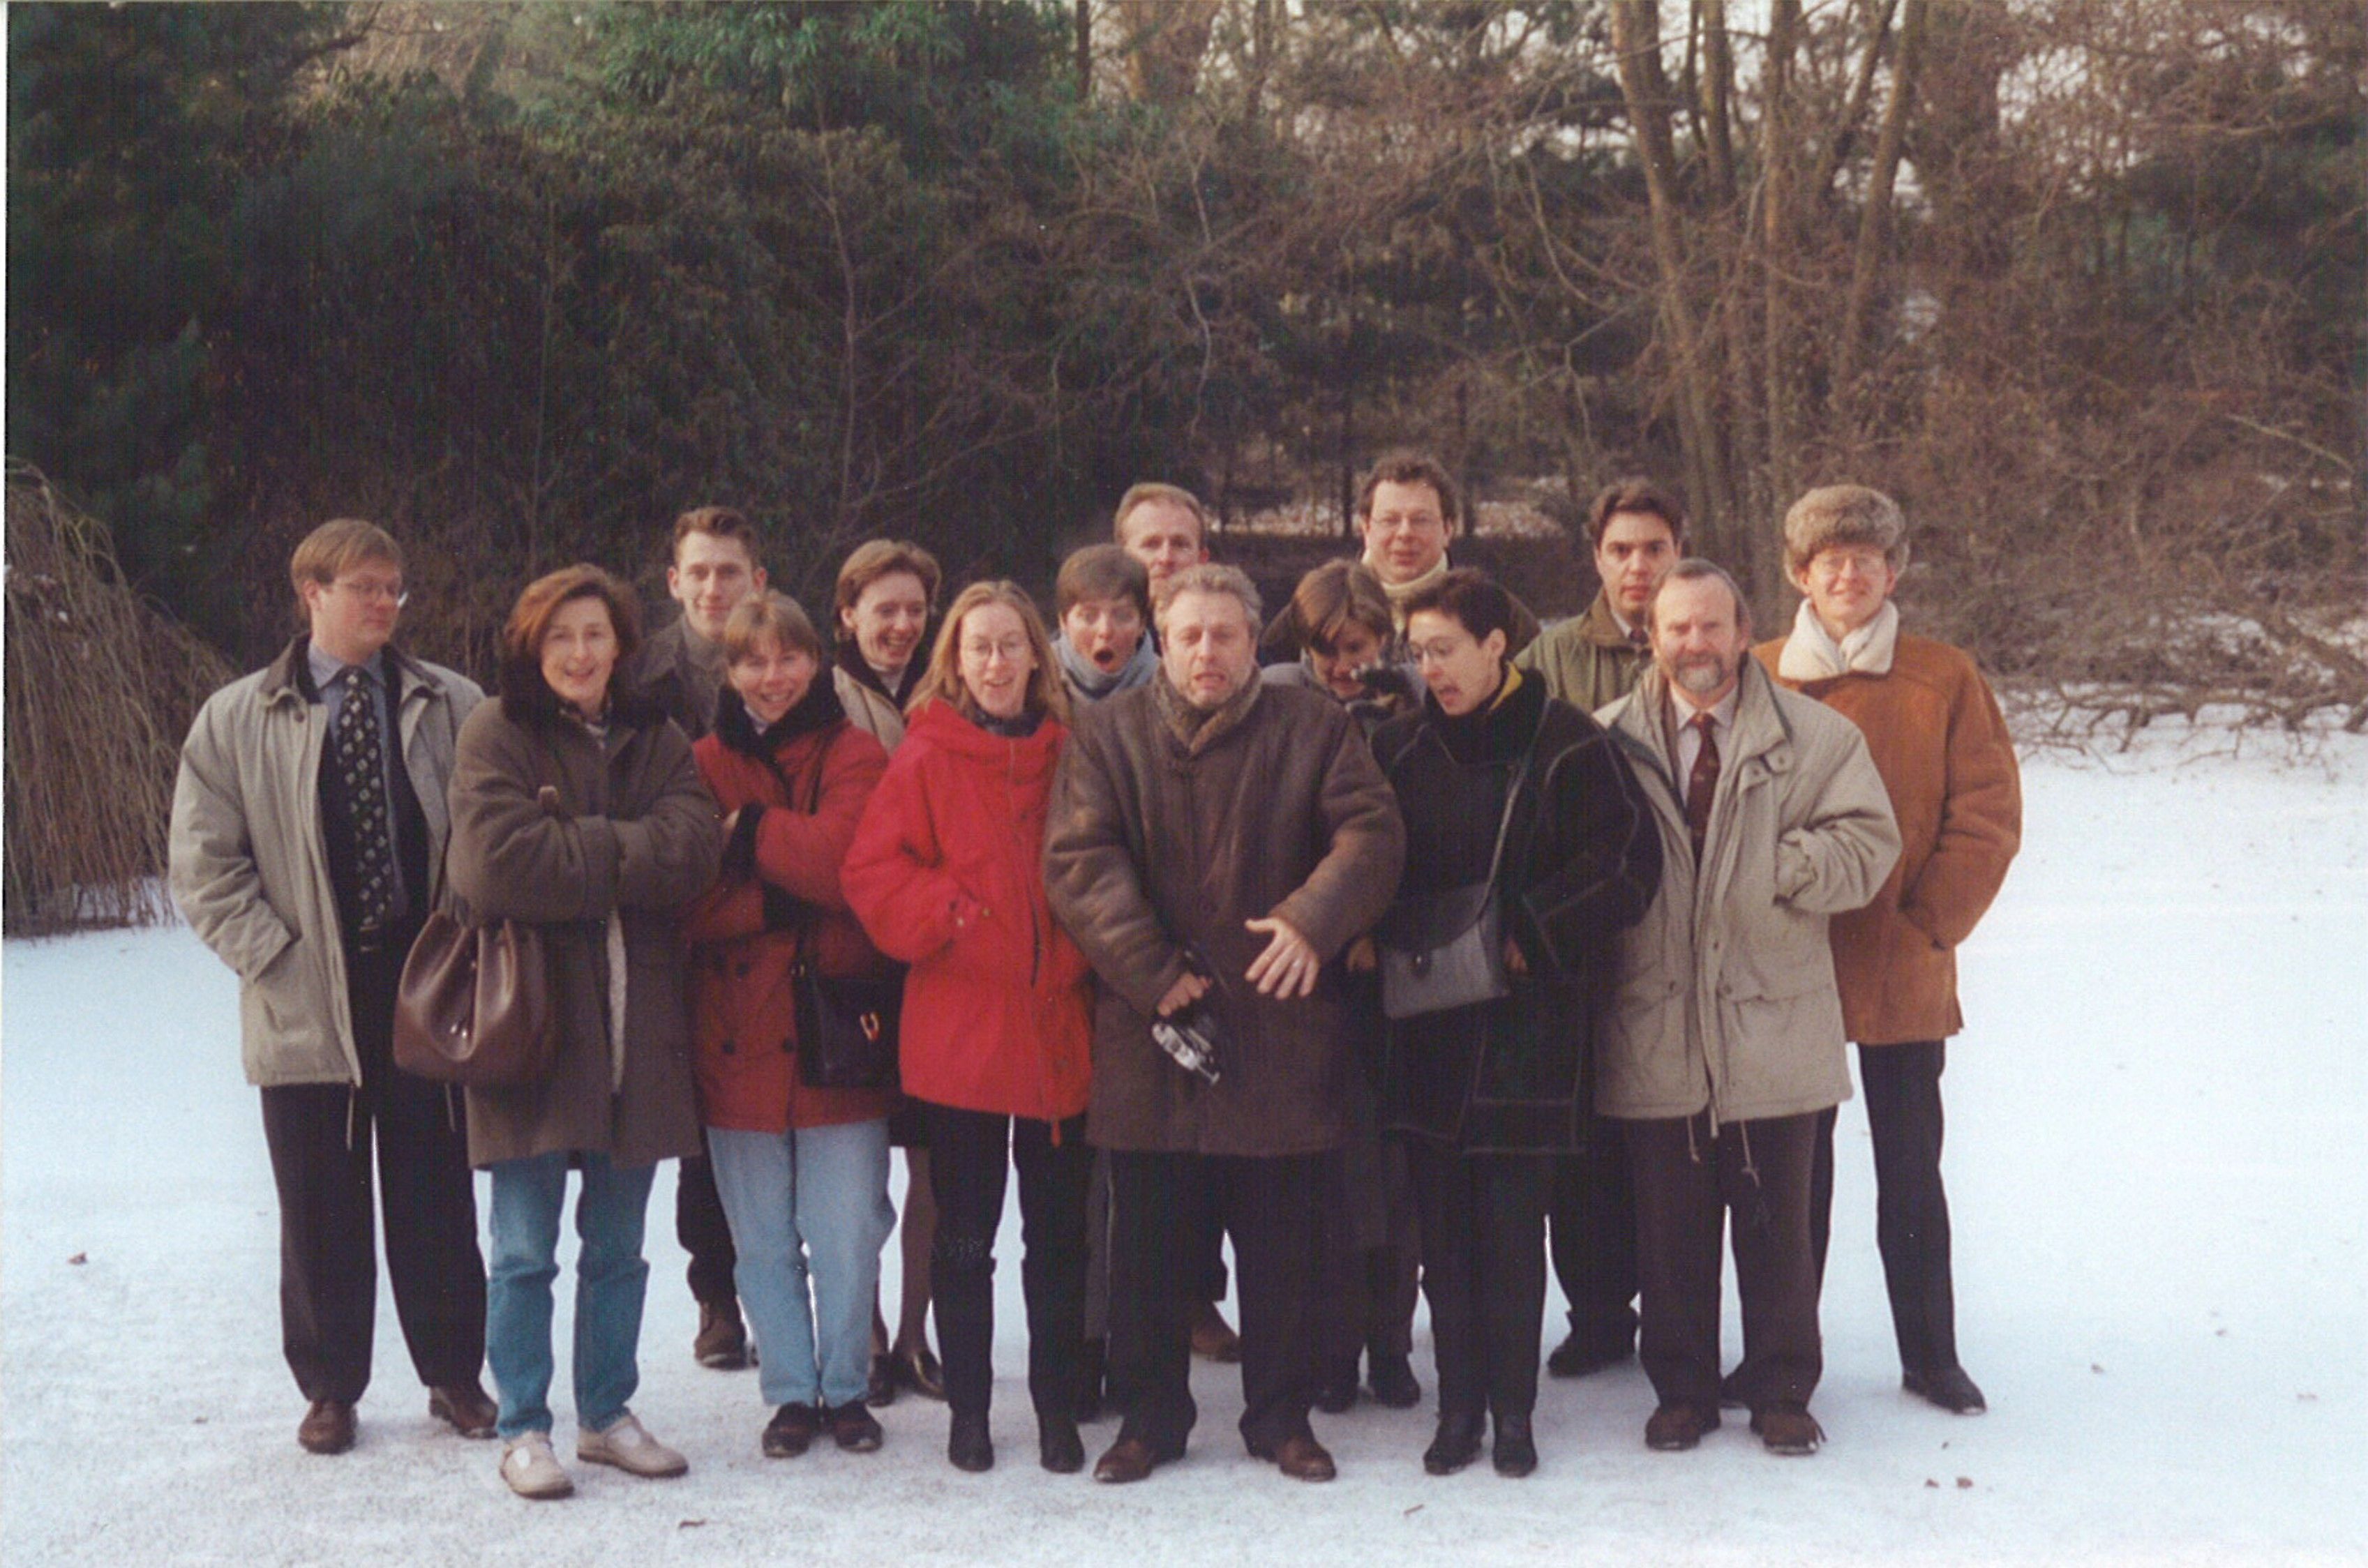 1996 - The VIB HQ team in the snow